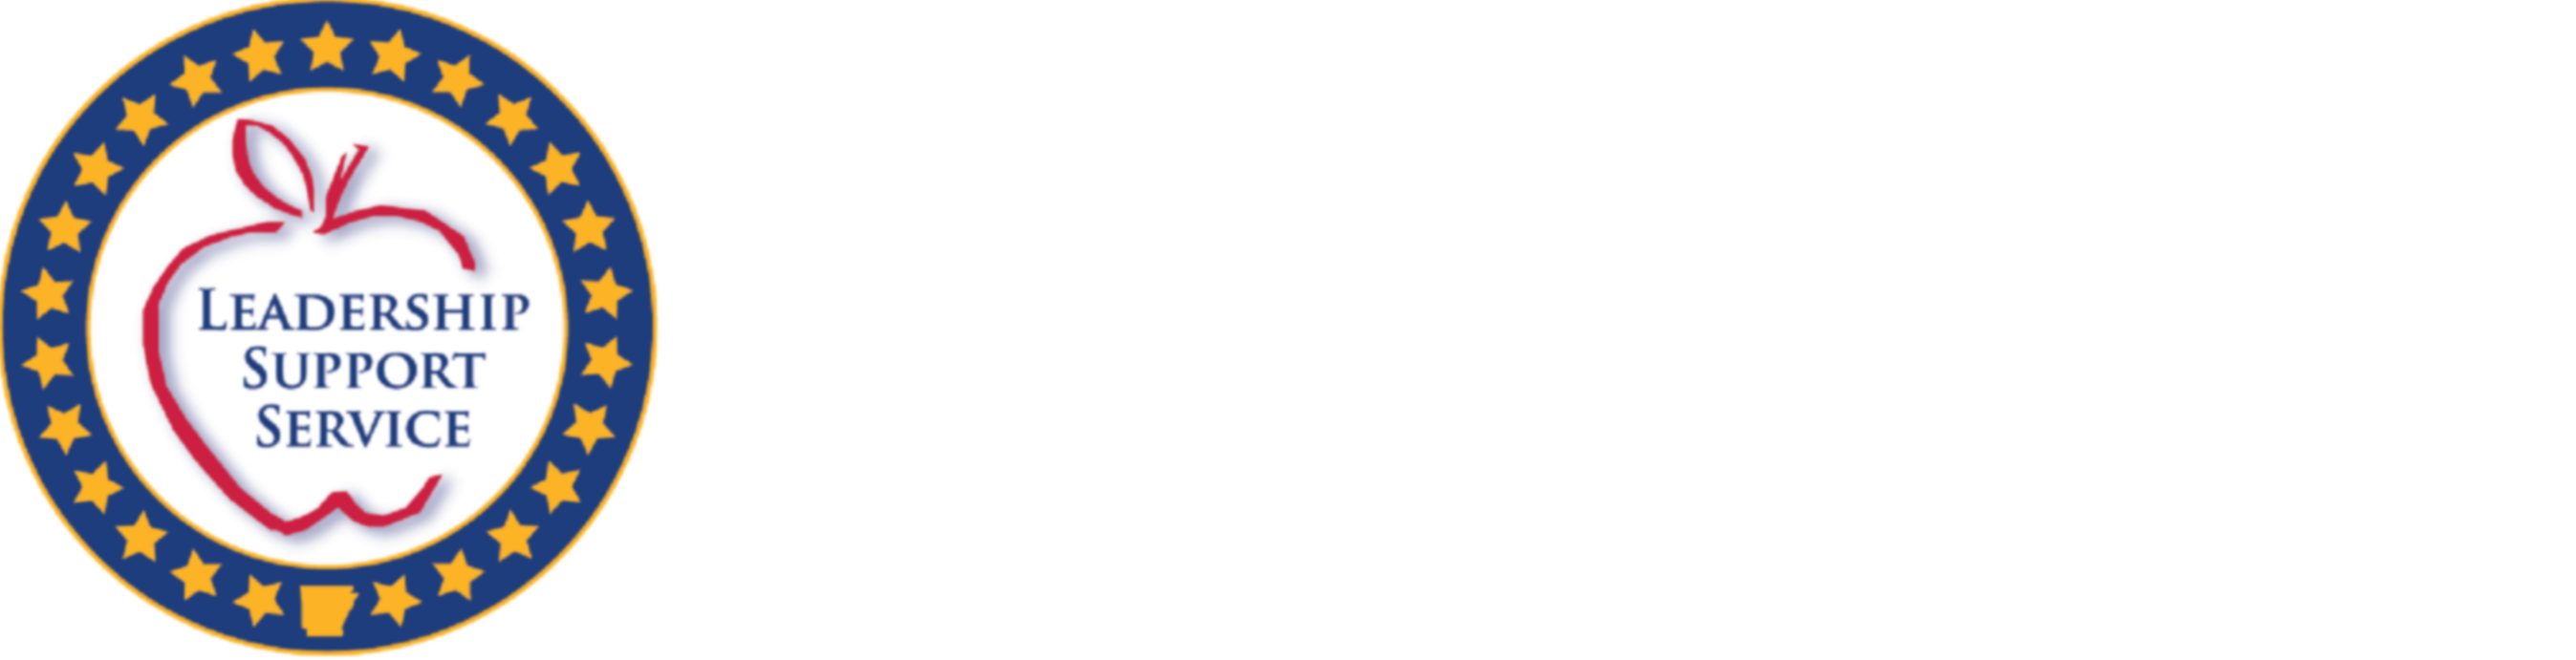 Click Here to Access the Page for The Division of Elementary and Secondary Education State Required Information 